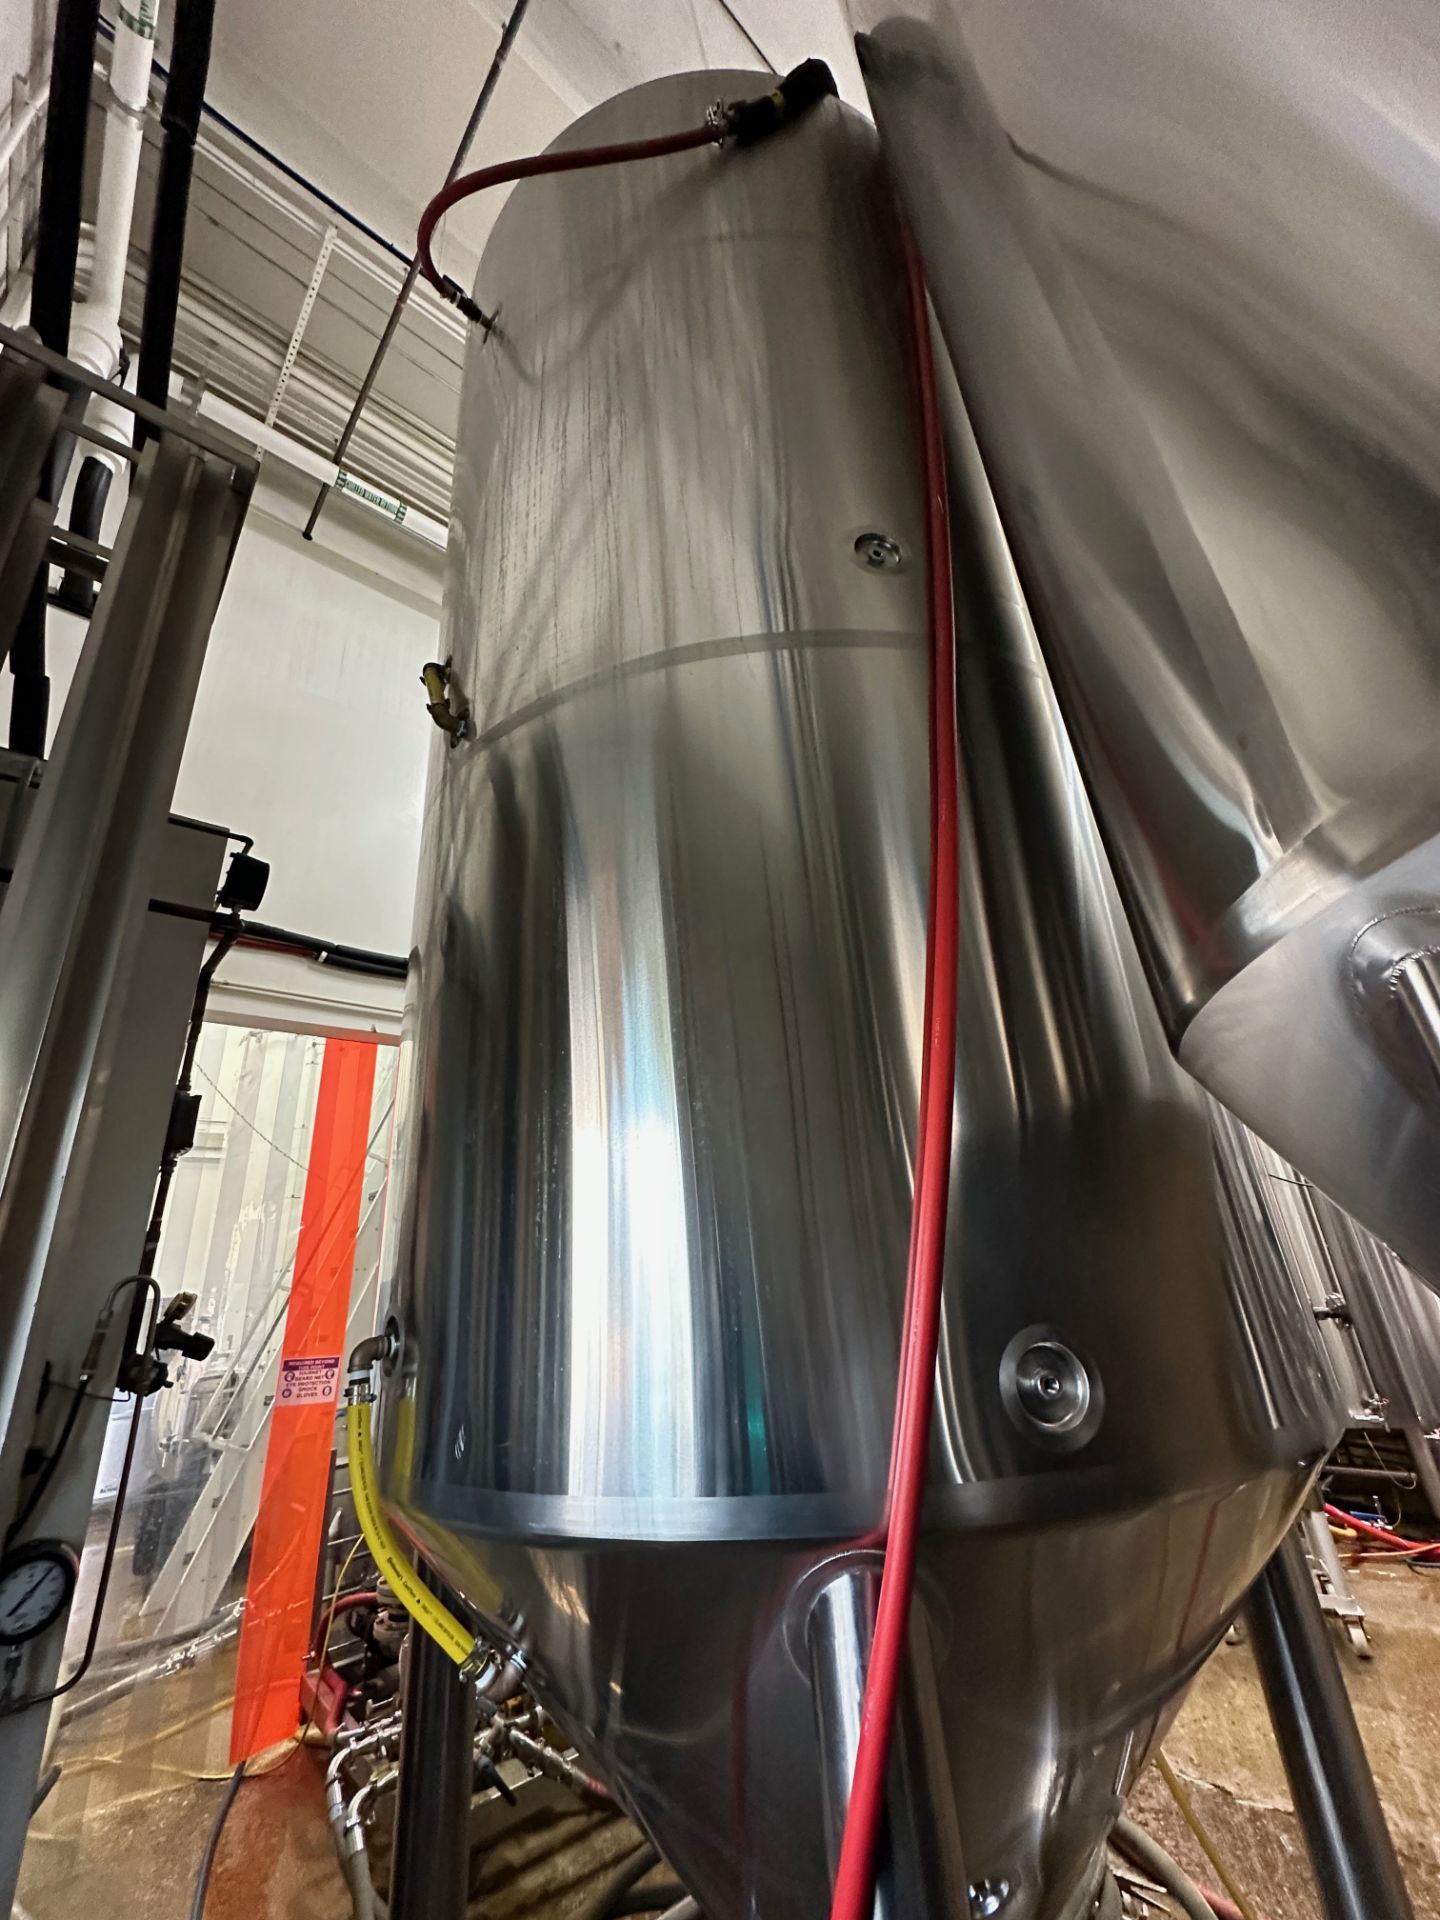 2019 ABS 120 BBL Stainless Steel Fermentation Tank - Cone Bottom with 3" | Rig Fee $2150 w/ Saddles - Image 2 of 2